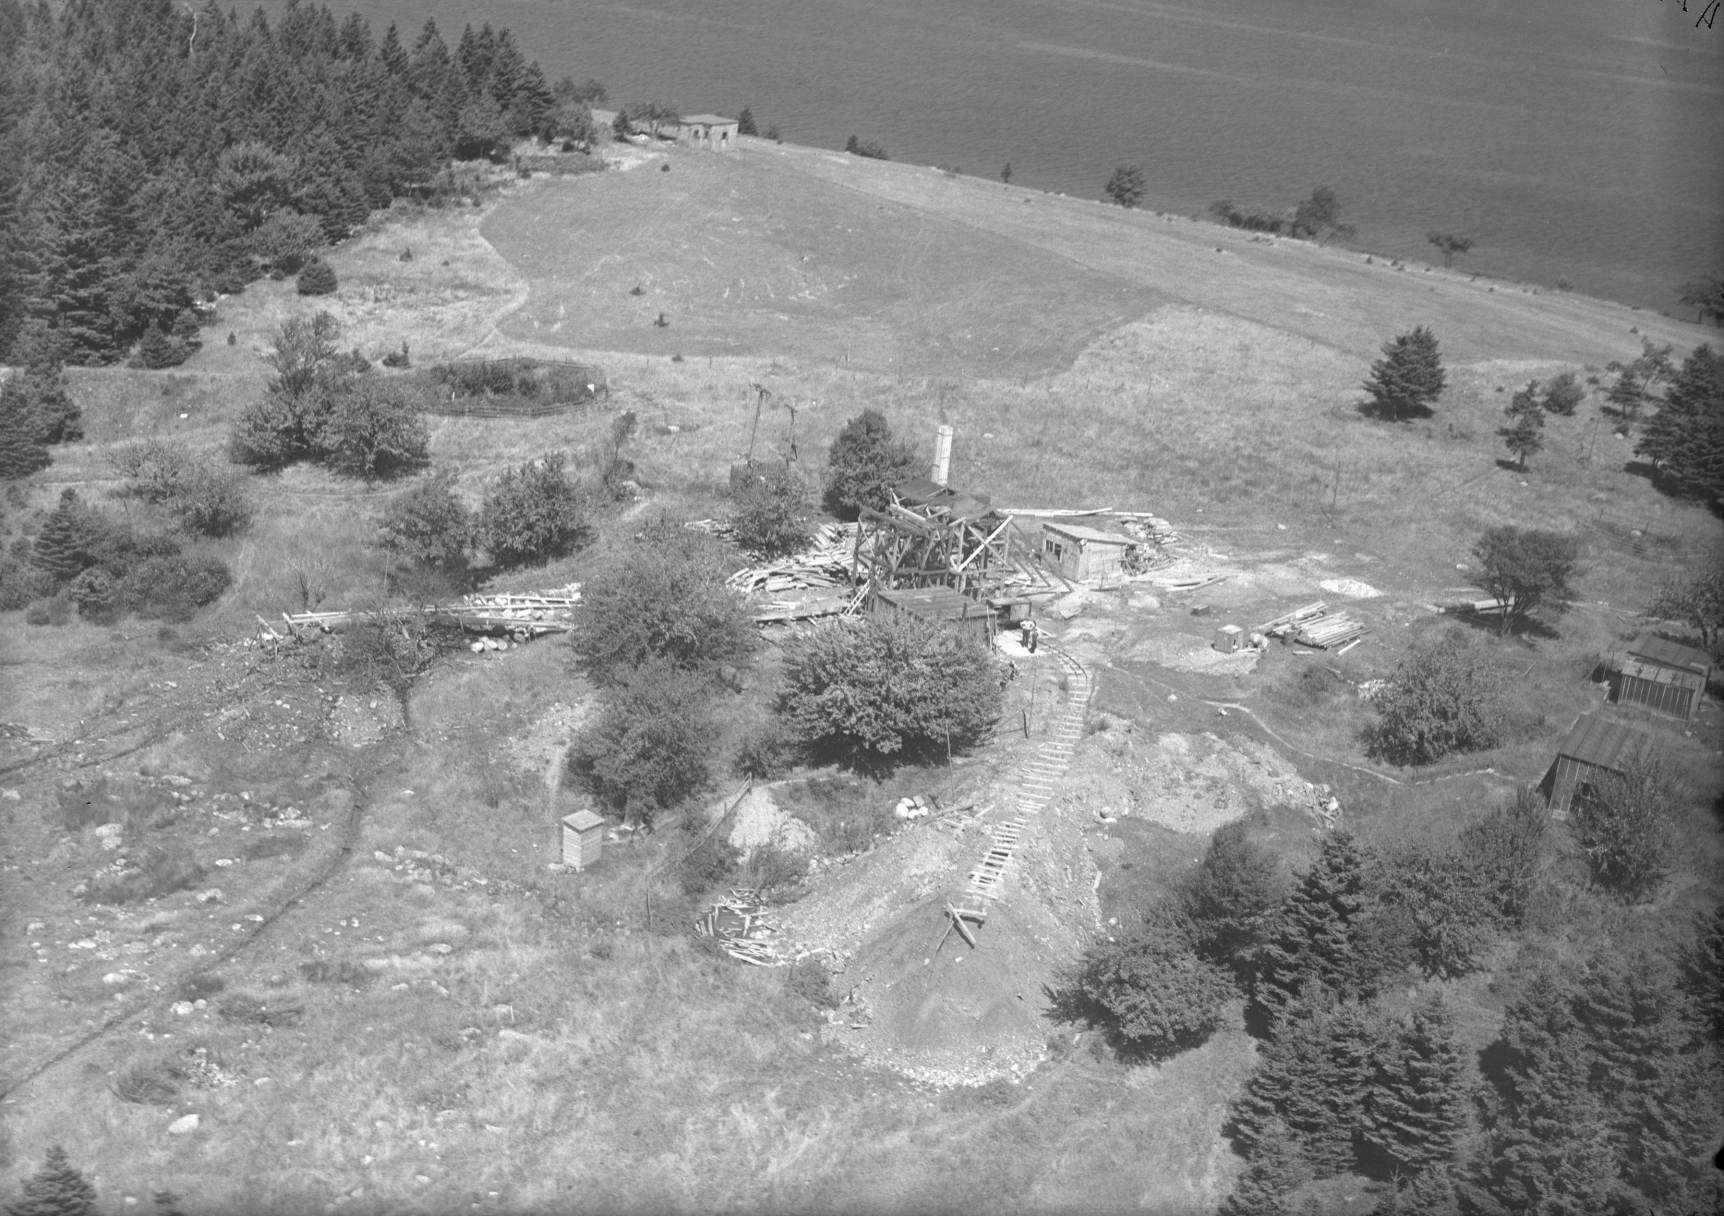 A photo was taken in August of 1931 at Oak Island in Nova Scotia, Canada. It depicted various digs and constructions.